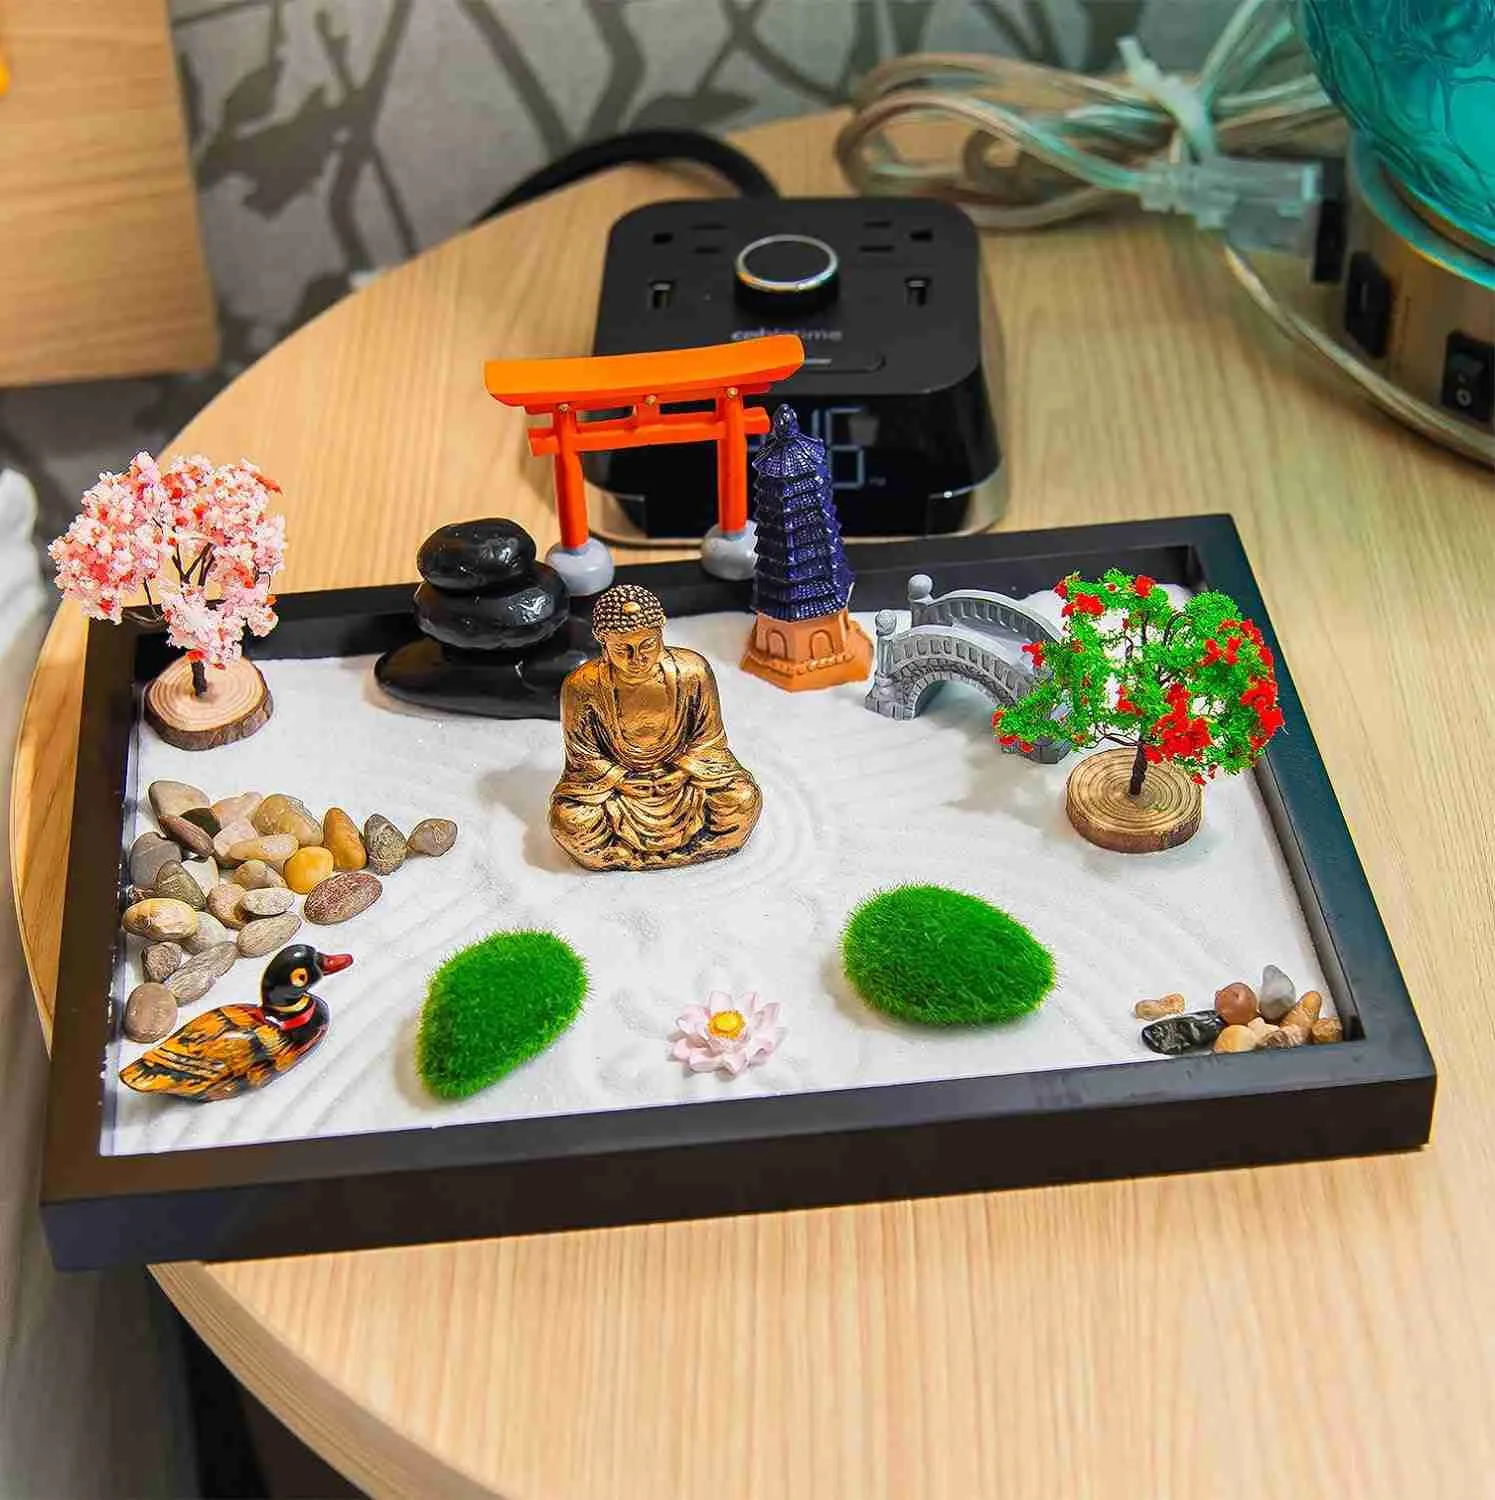 D Divinified Zen Garden For Desk Review – Can It Really Calm A Wandering Mind?